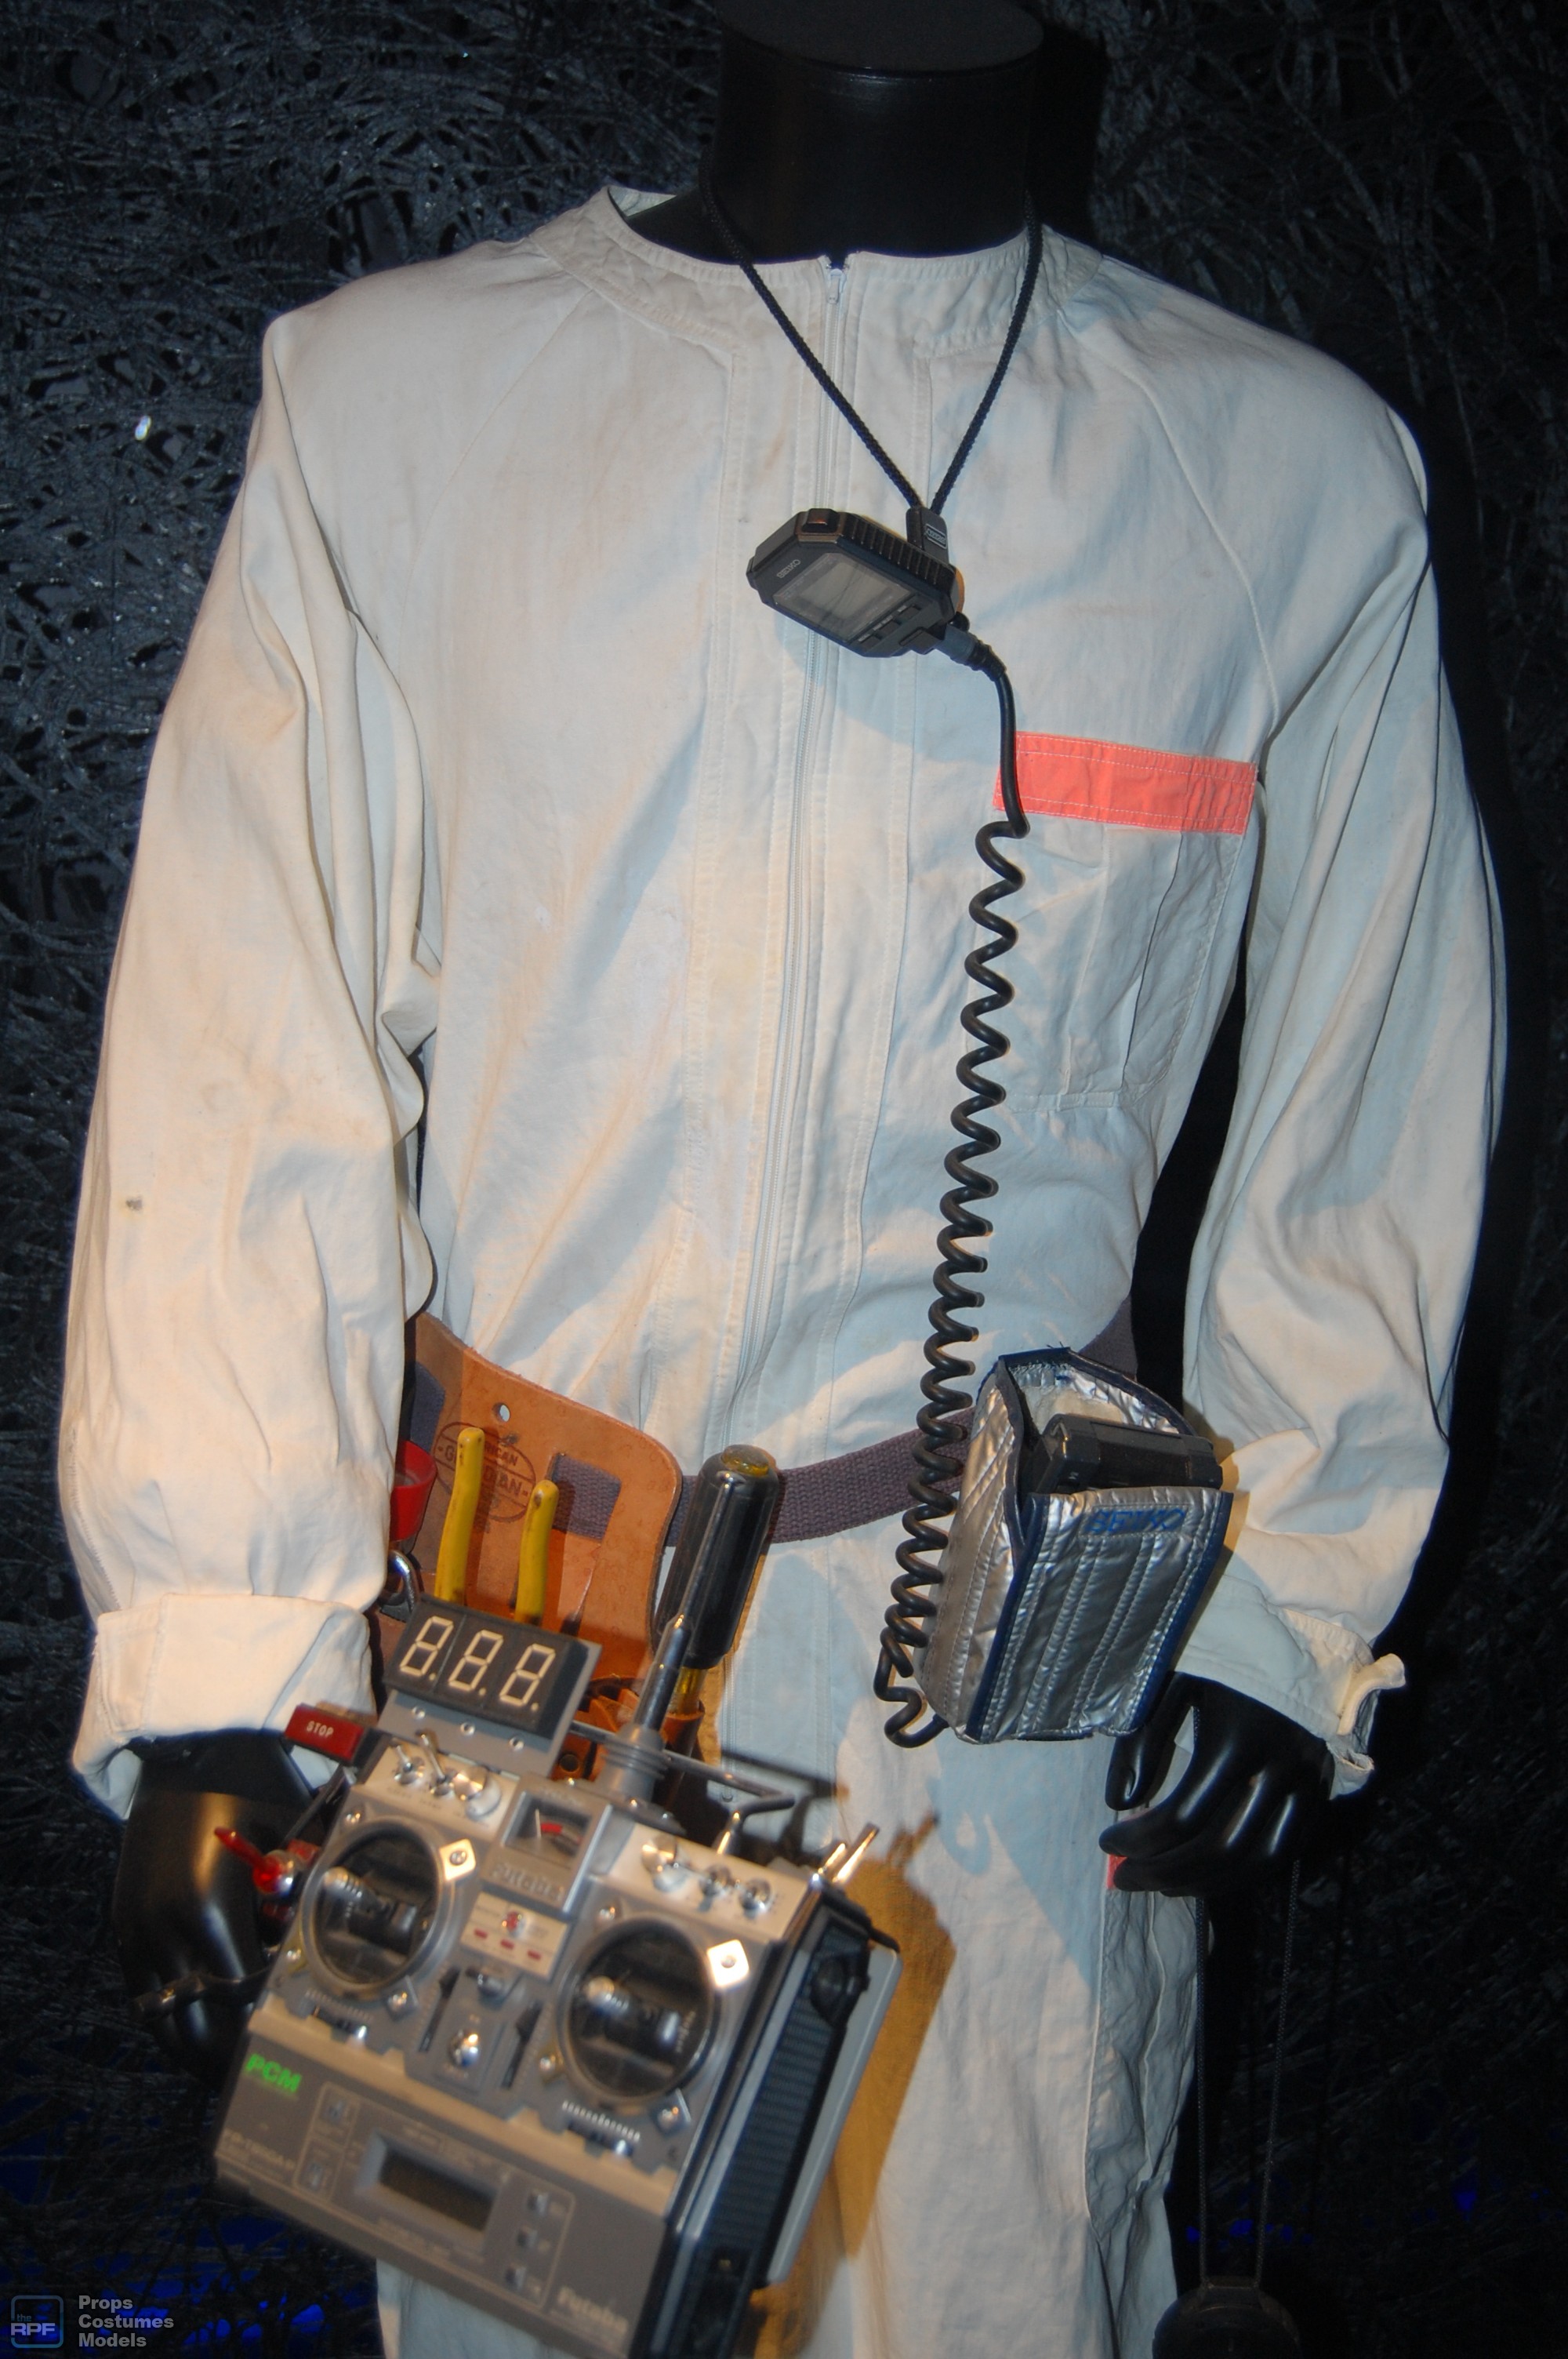 doc's remote control and suit